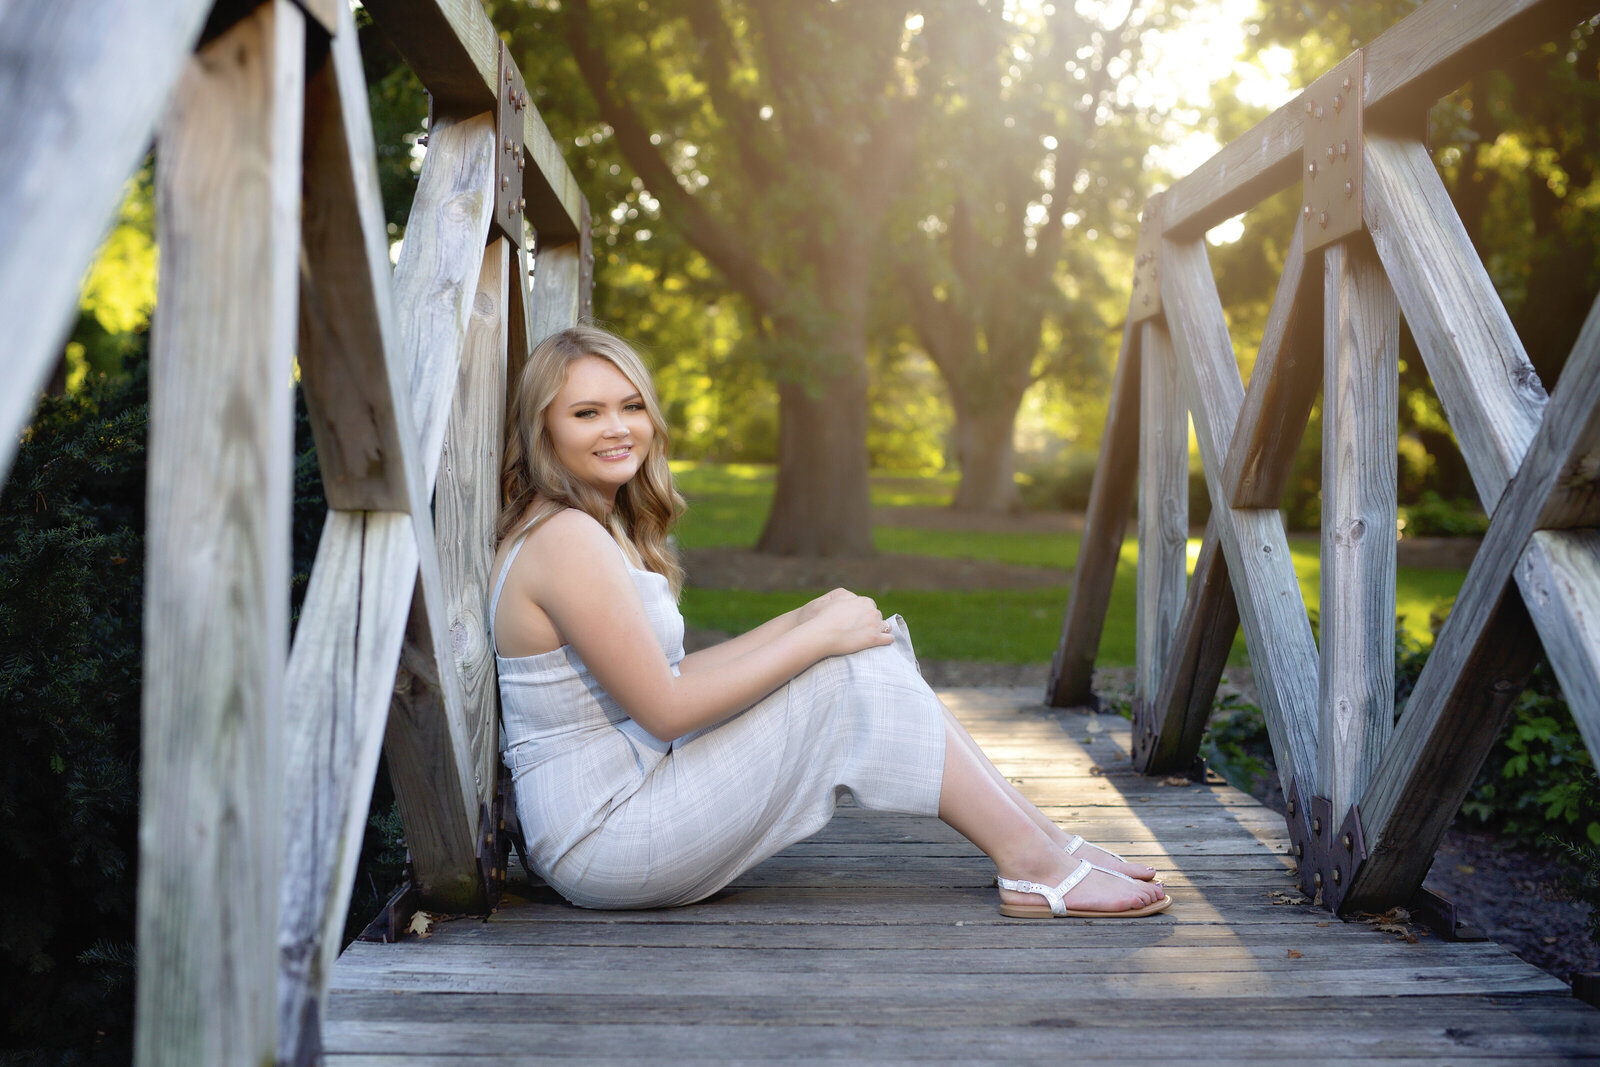 Schuyler rests against the side of a bridge during a senior photo shoot